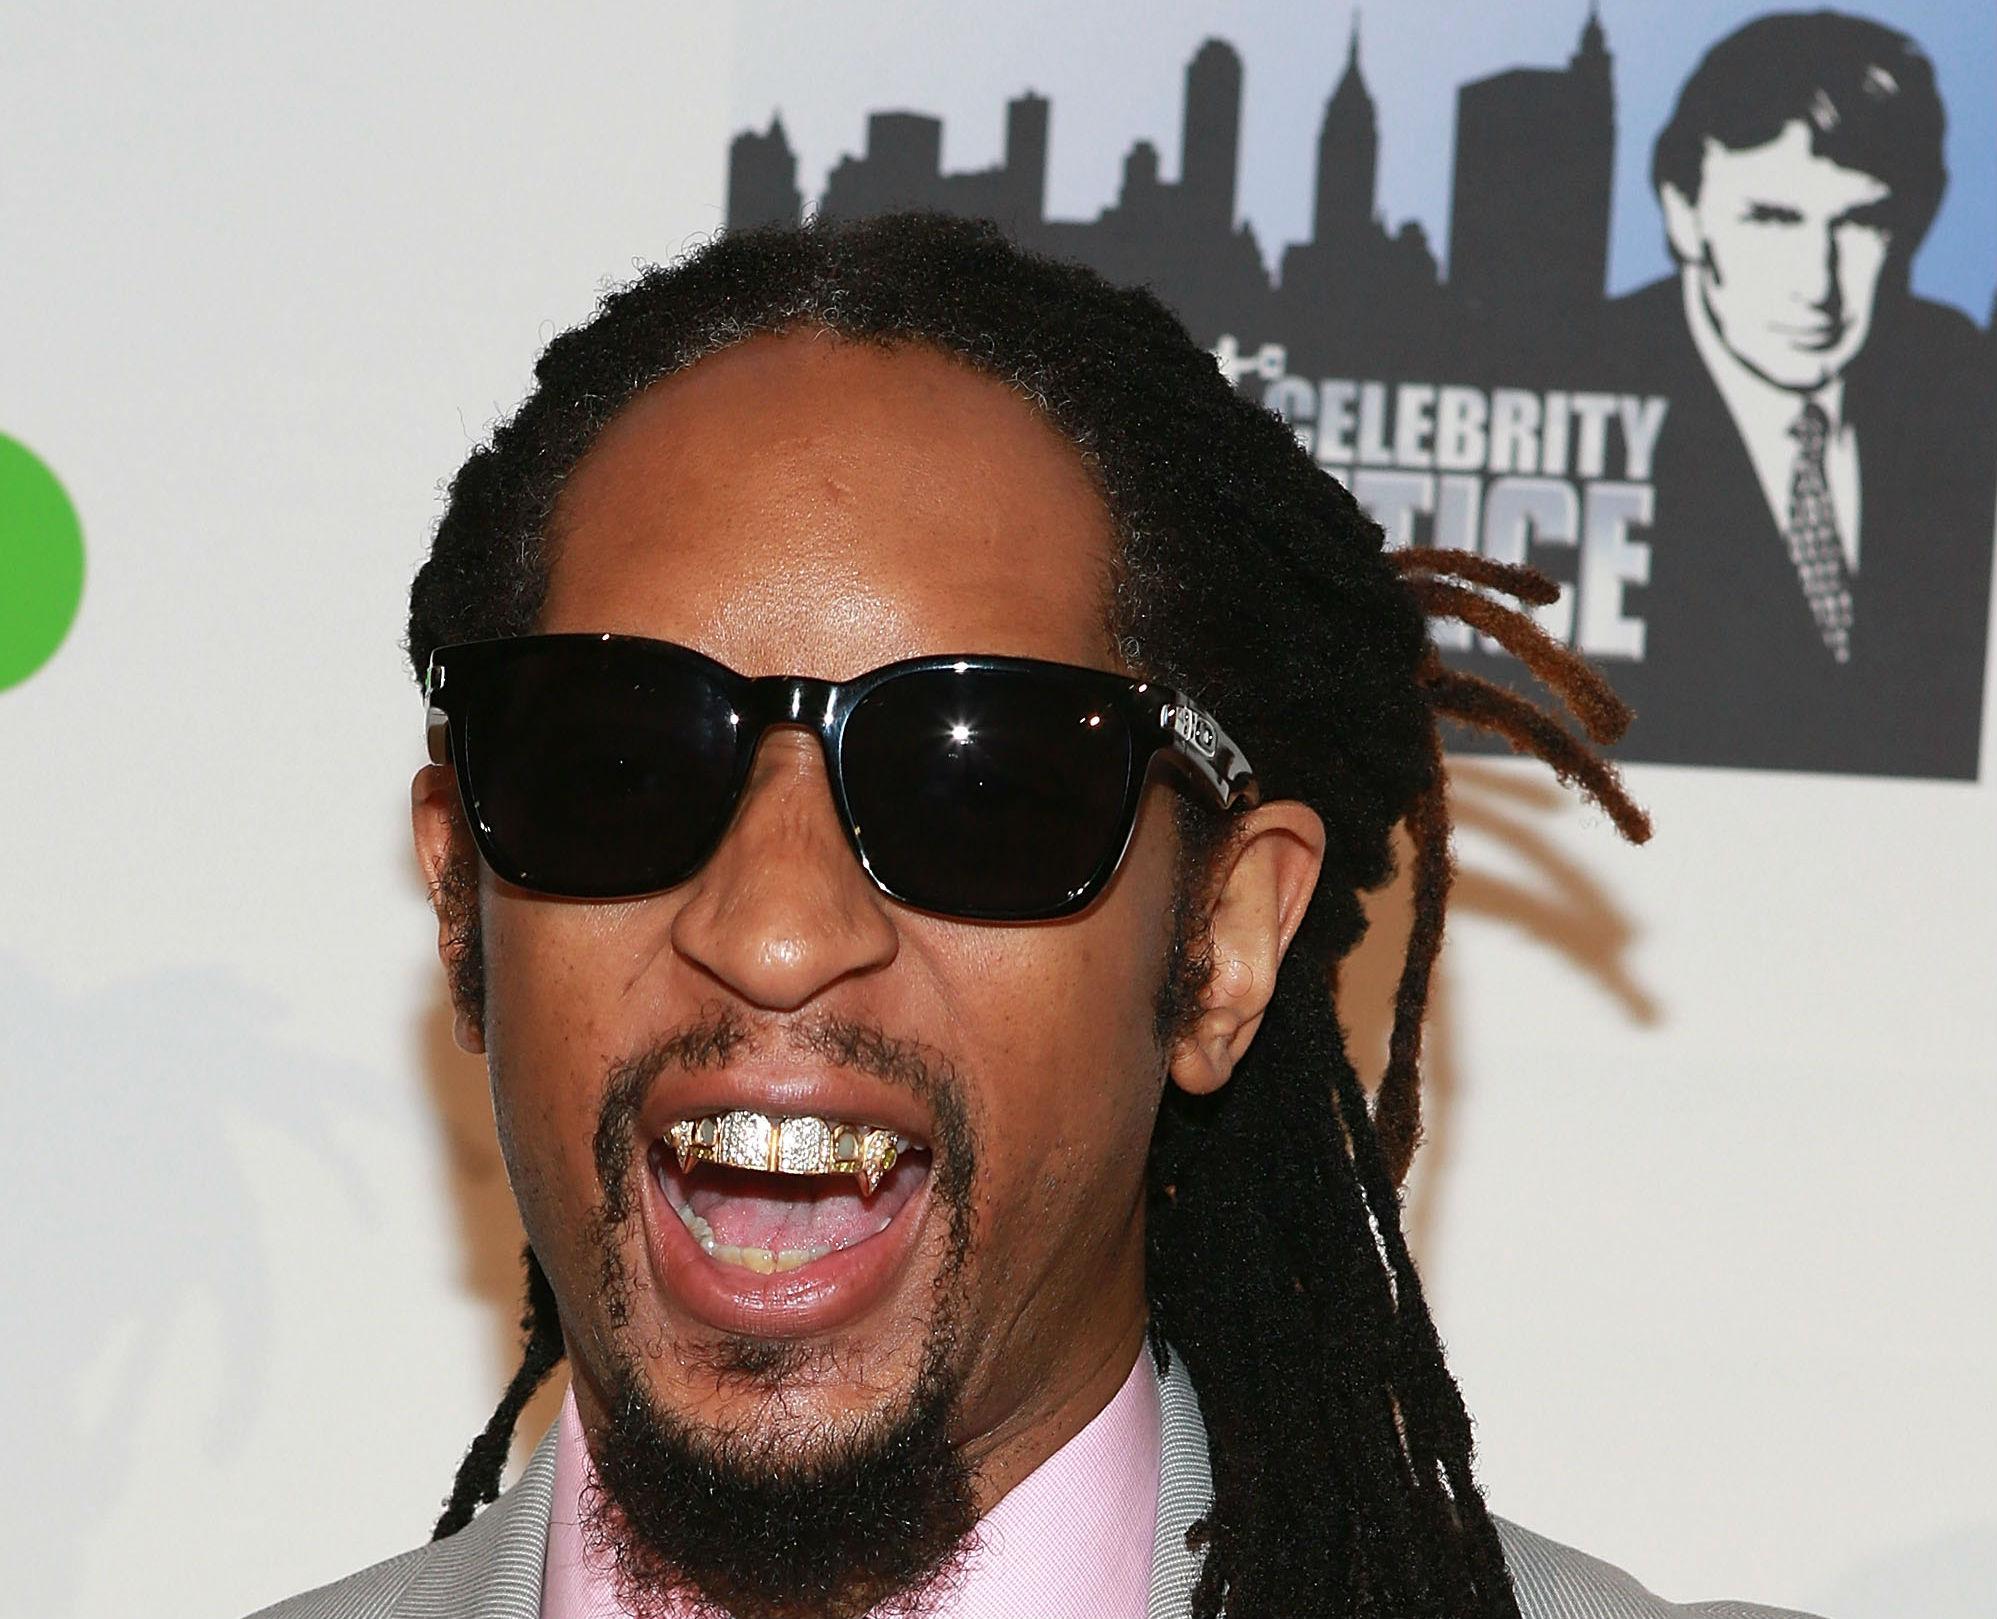 Lil Jon claims Donald Trump called him 'Uncle Tom' on the set of